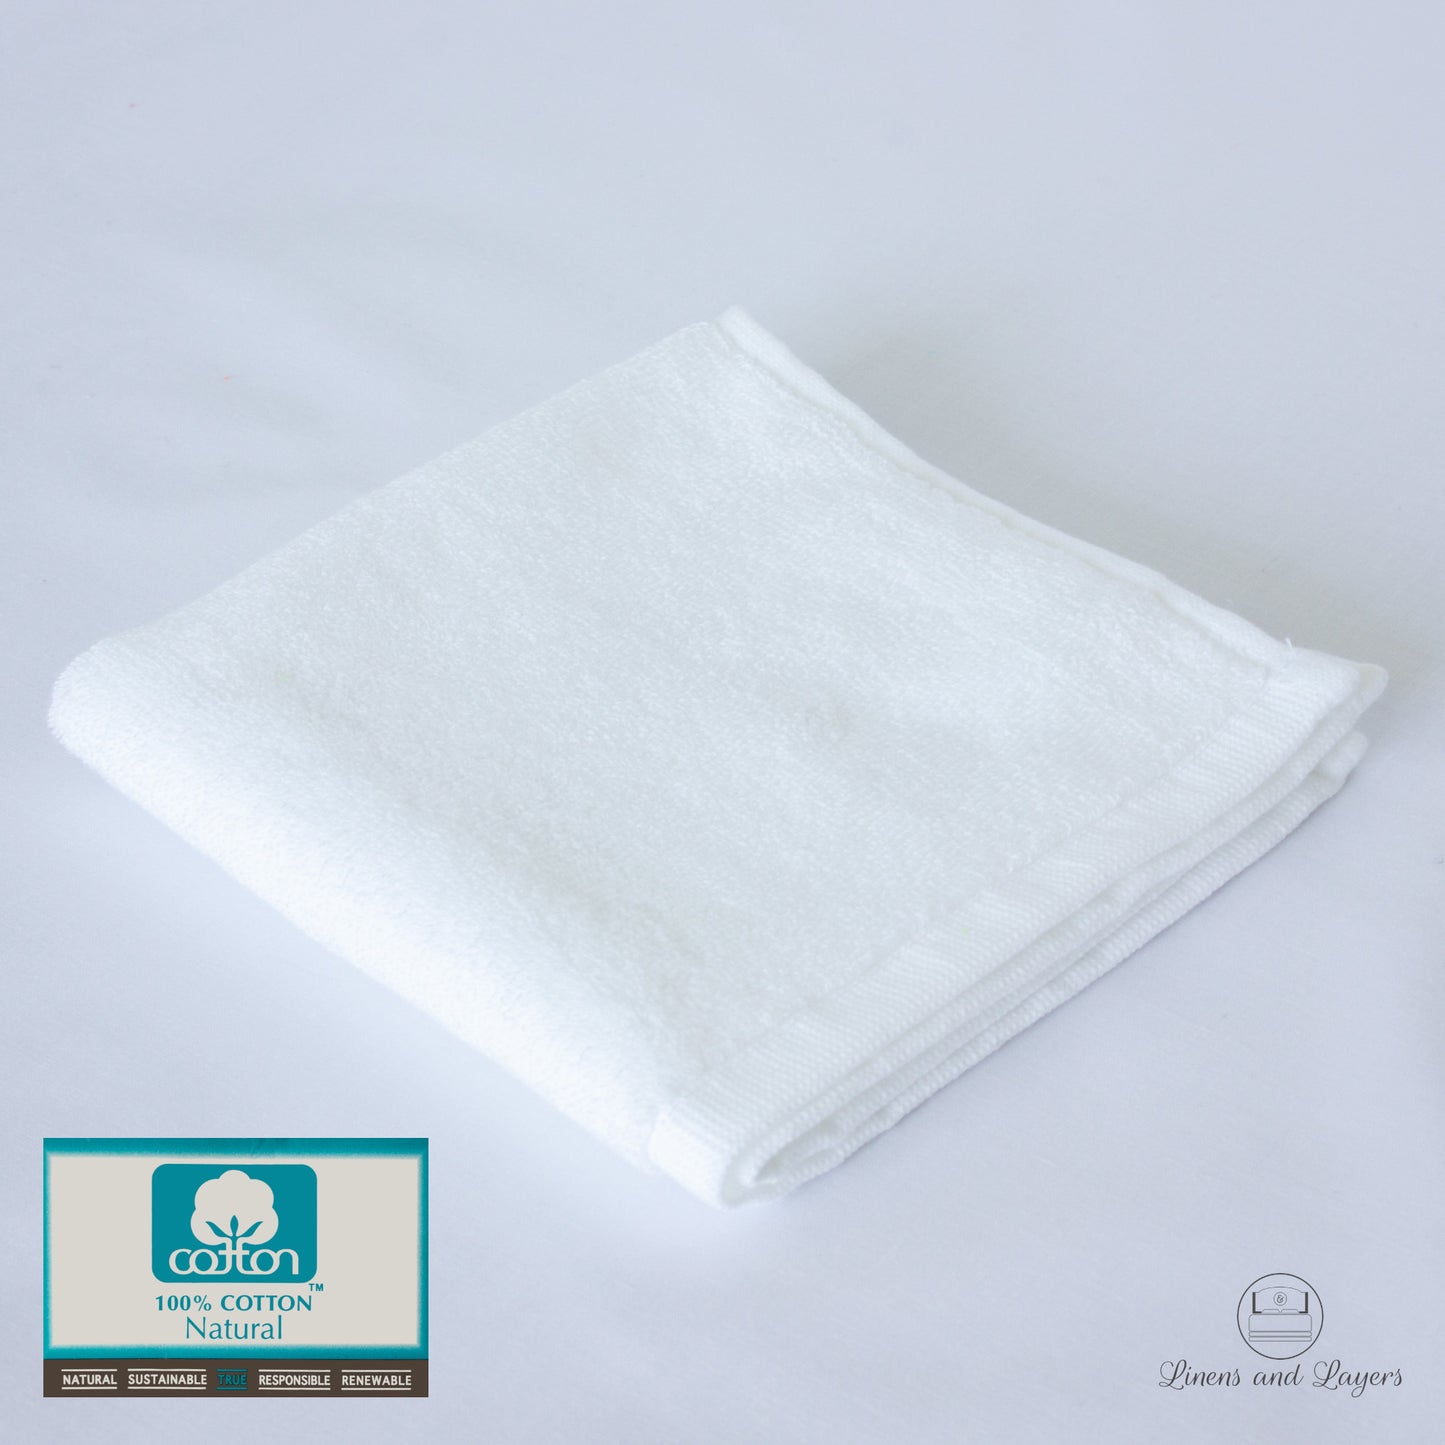 Olympic White Face Towel (430 GSM) - DK-1212 Terrycloth - 12x12